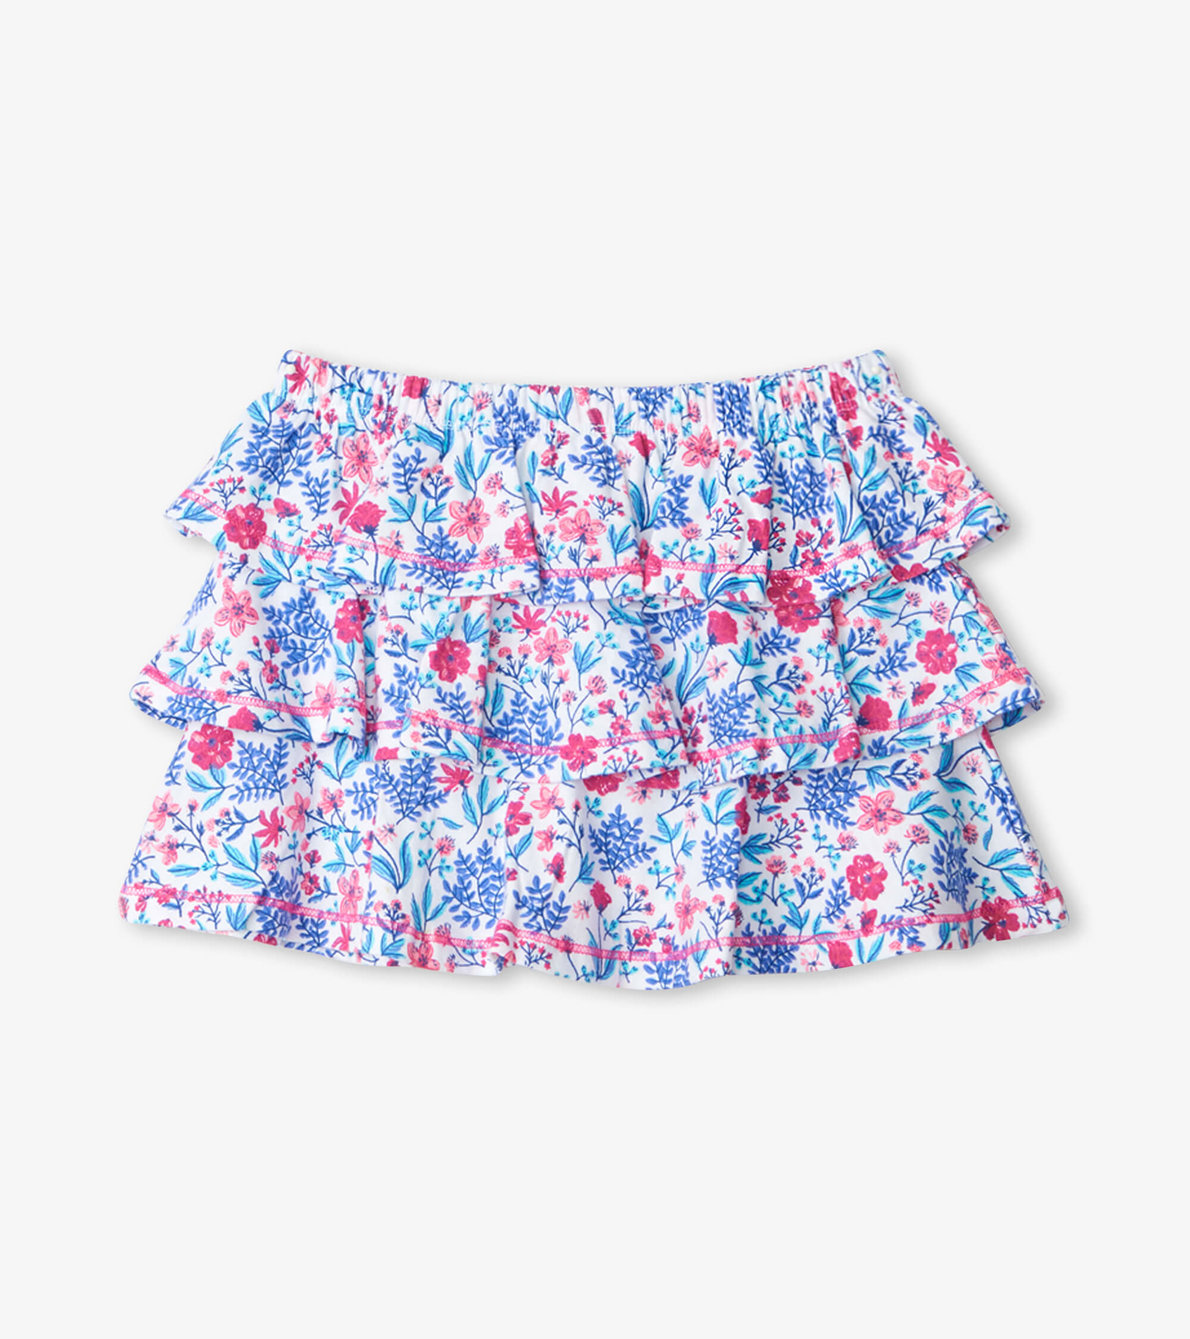 View larger image of Wild Flowers Tiered Skirt